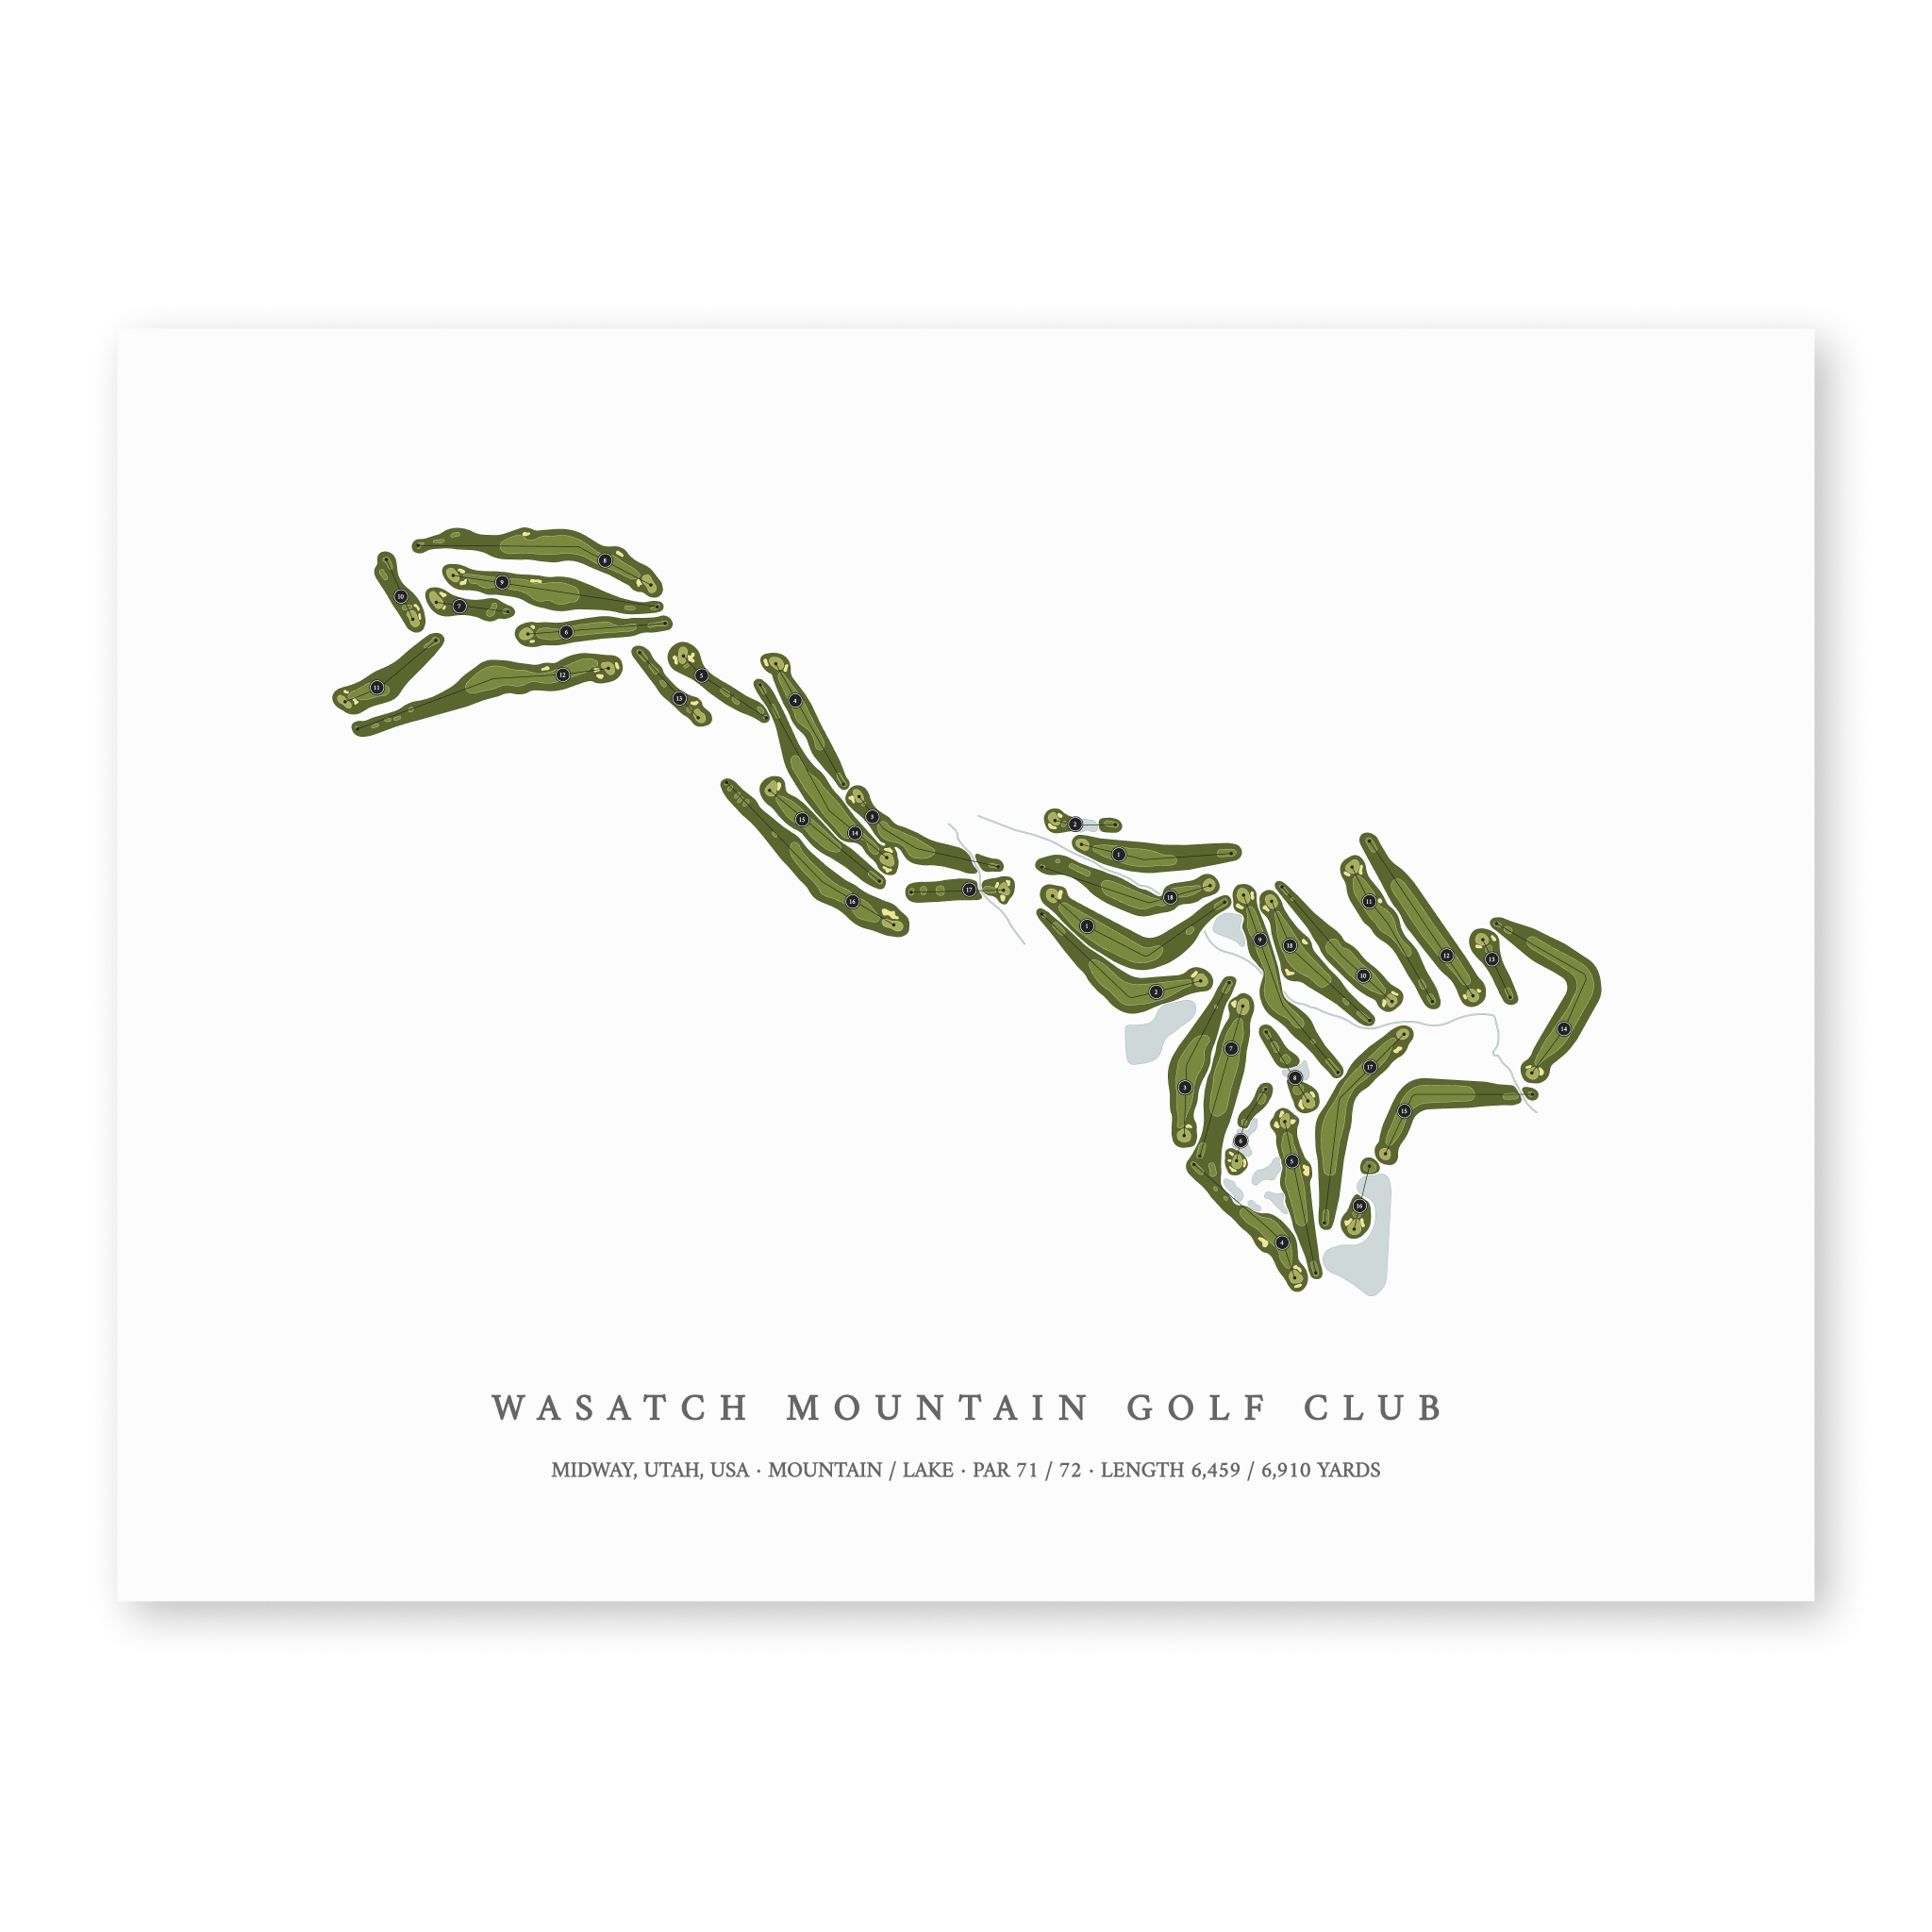 Wasatch Mountain Golf Course| Golf Course Print | Unframed With Hole Numbers #hole numbers_yes